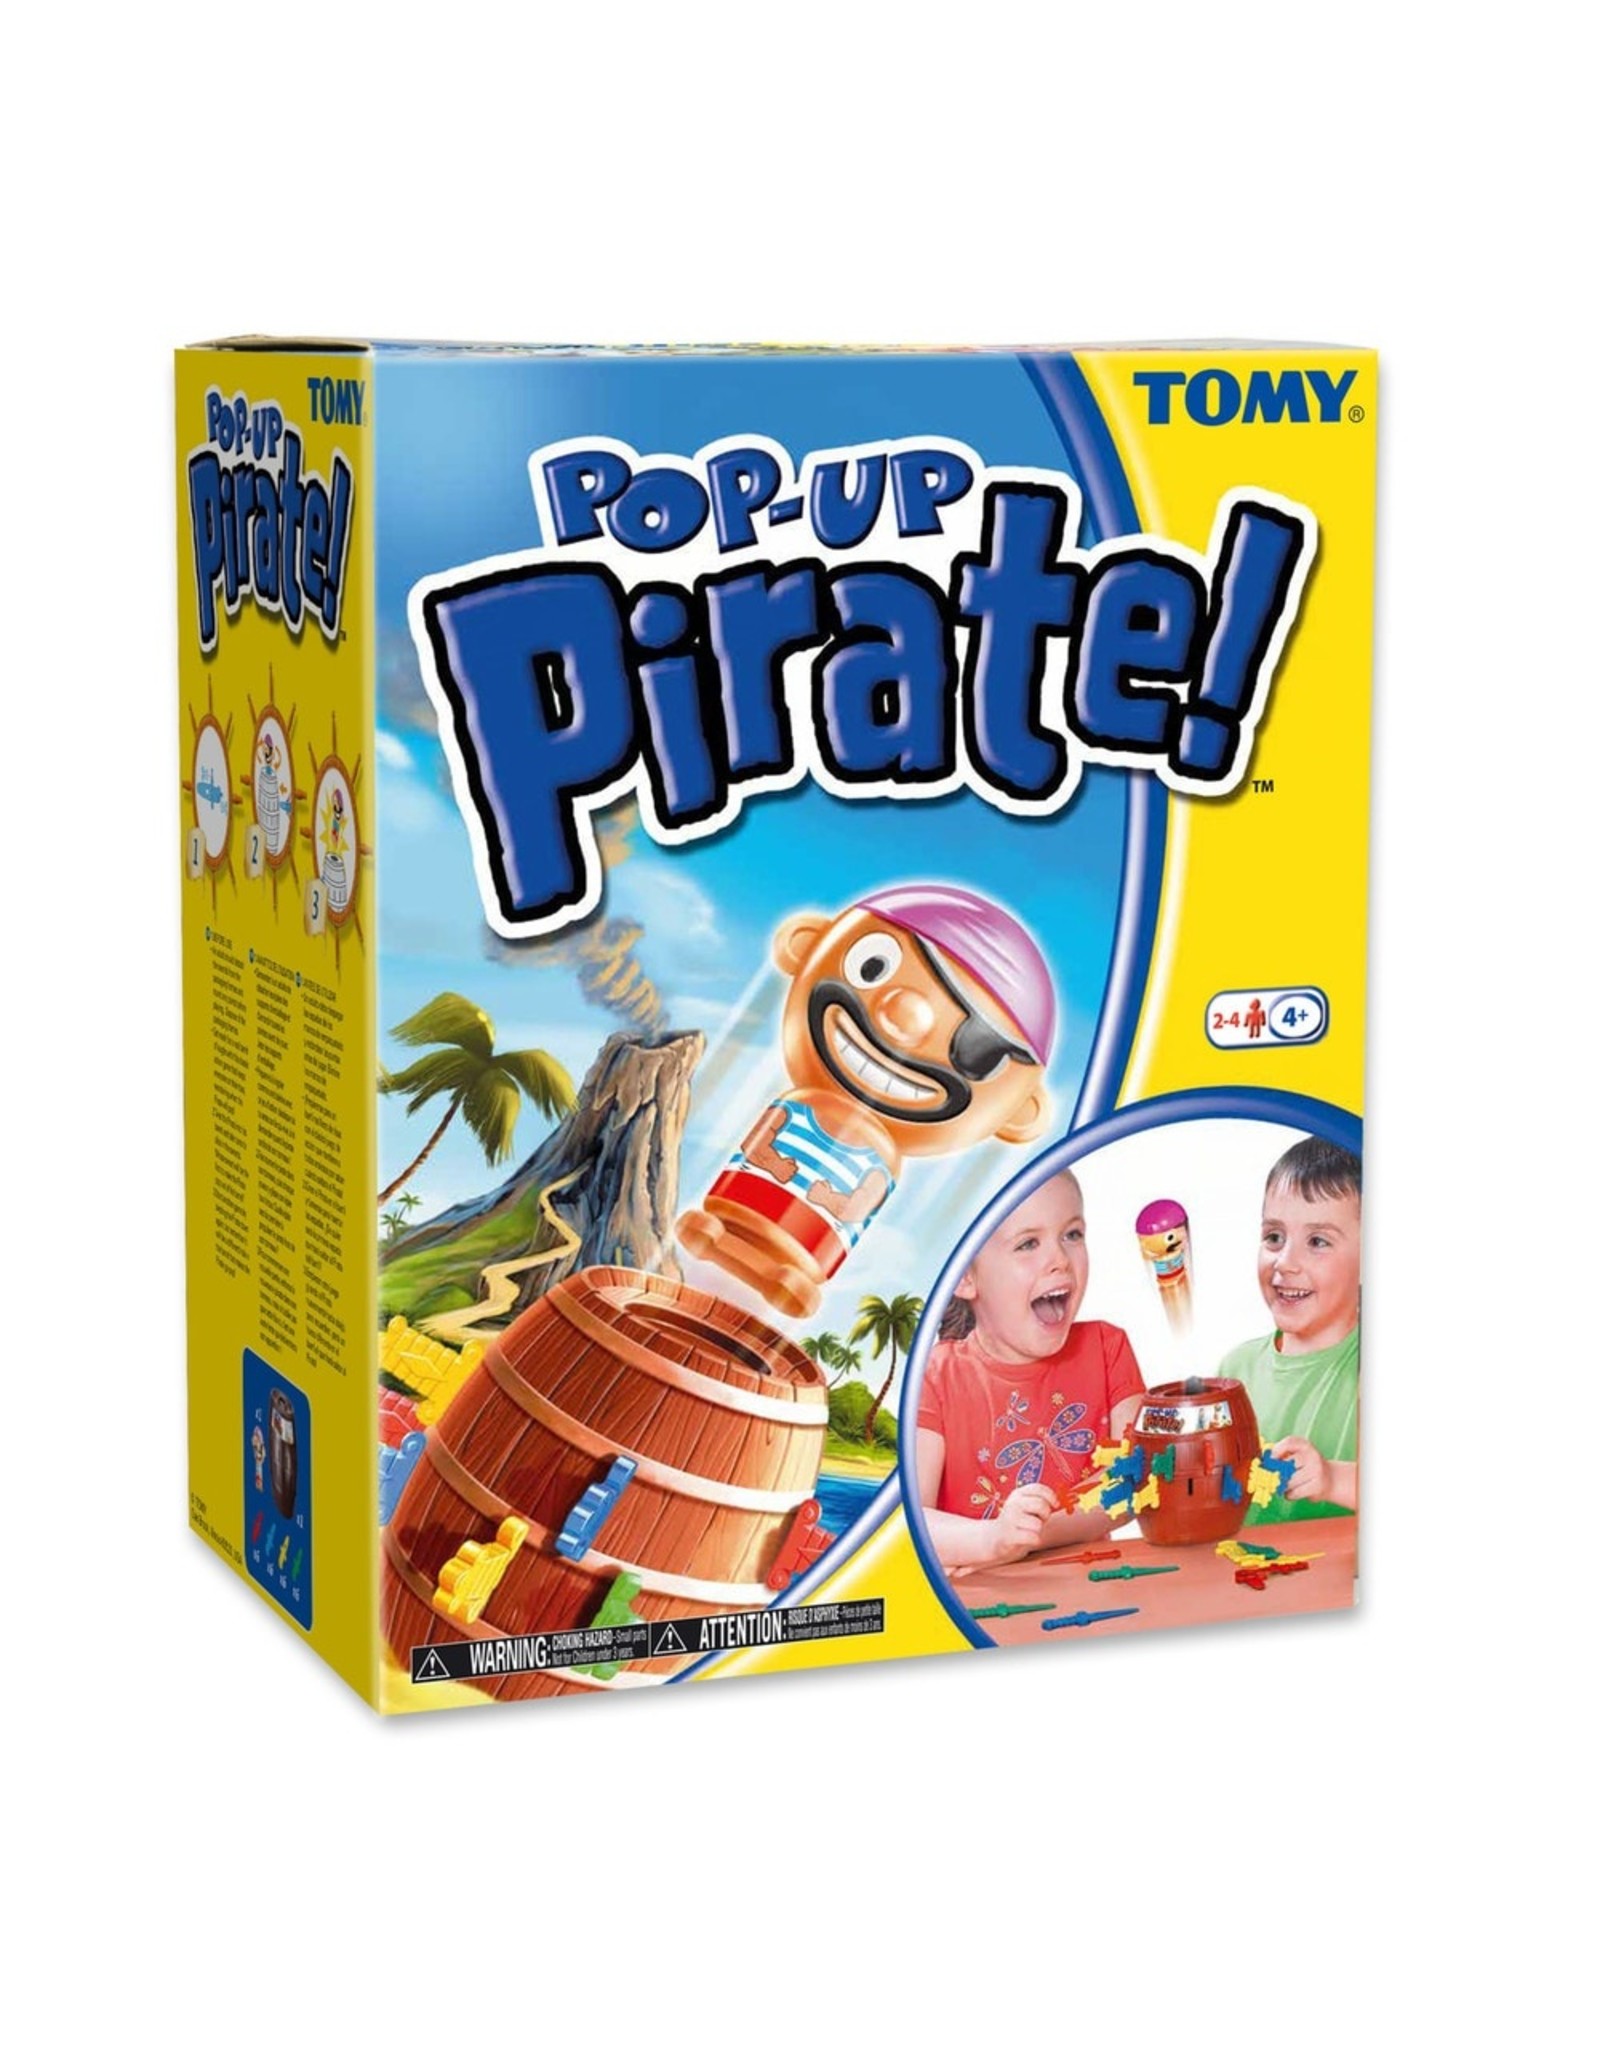 TOMY Pop Up Pirate Classic Children's Action Board Game, Family